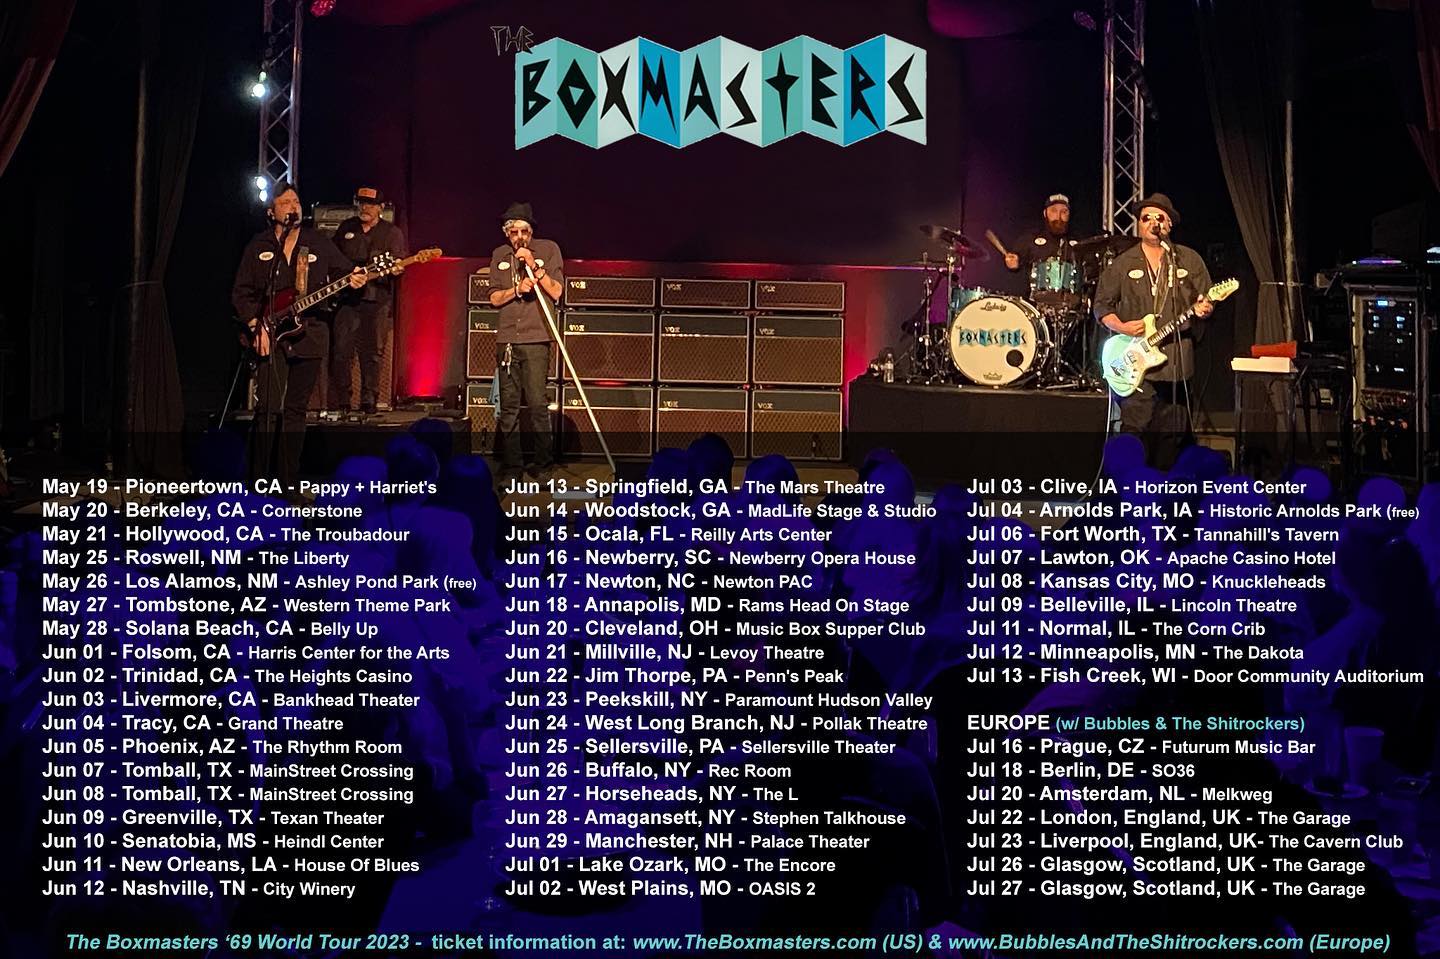 The full set of this summer's dates for the Boxmasters 69 Tour